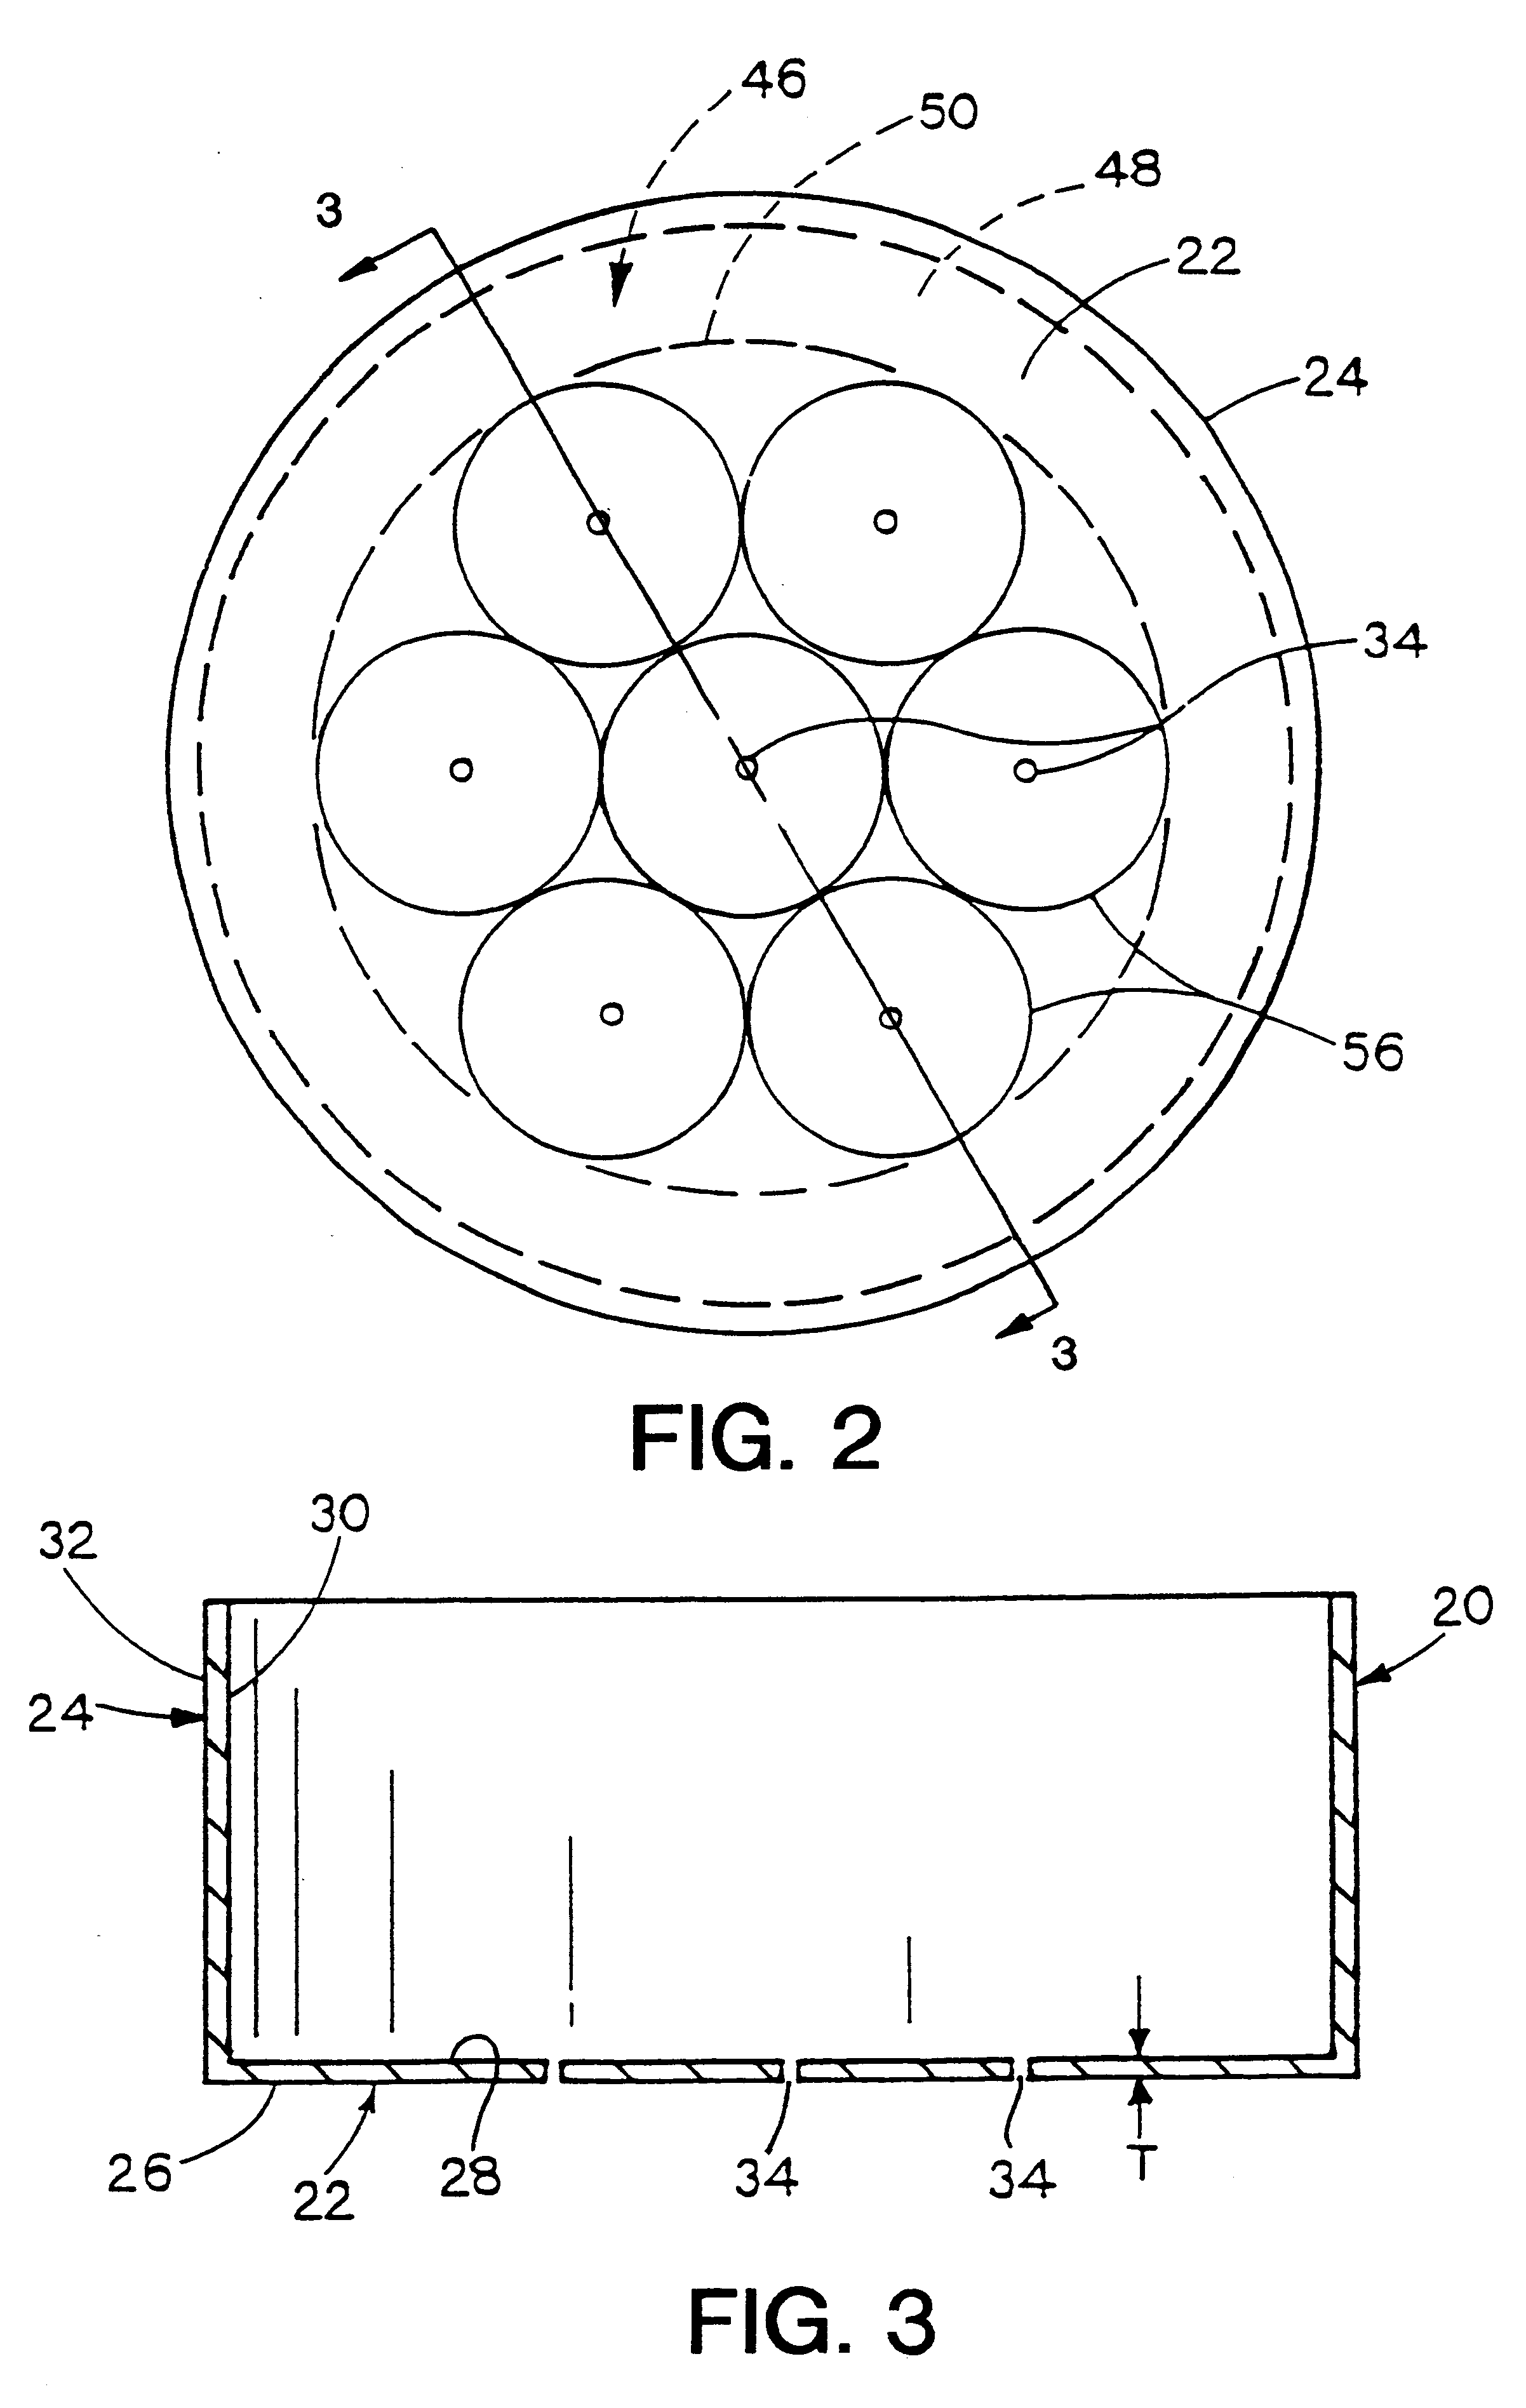 Metal-air cathode can, and electrochemical cell made therewith